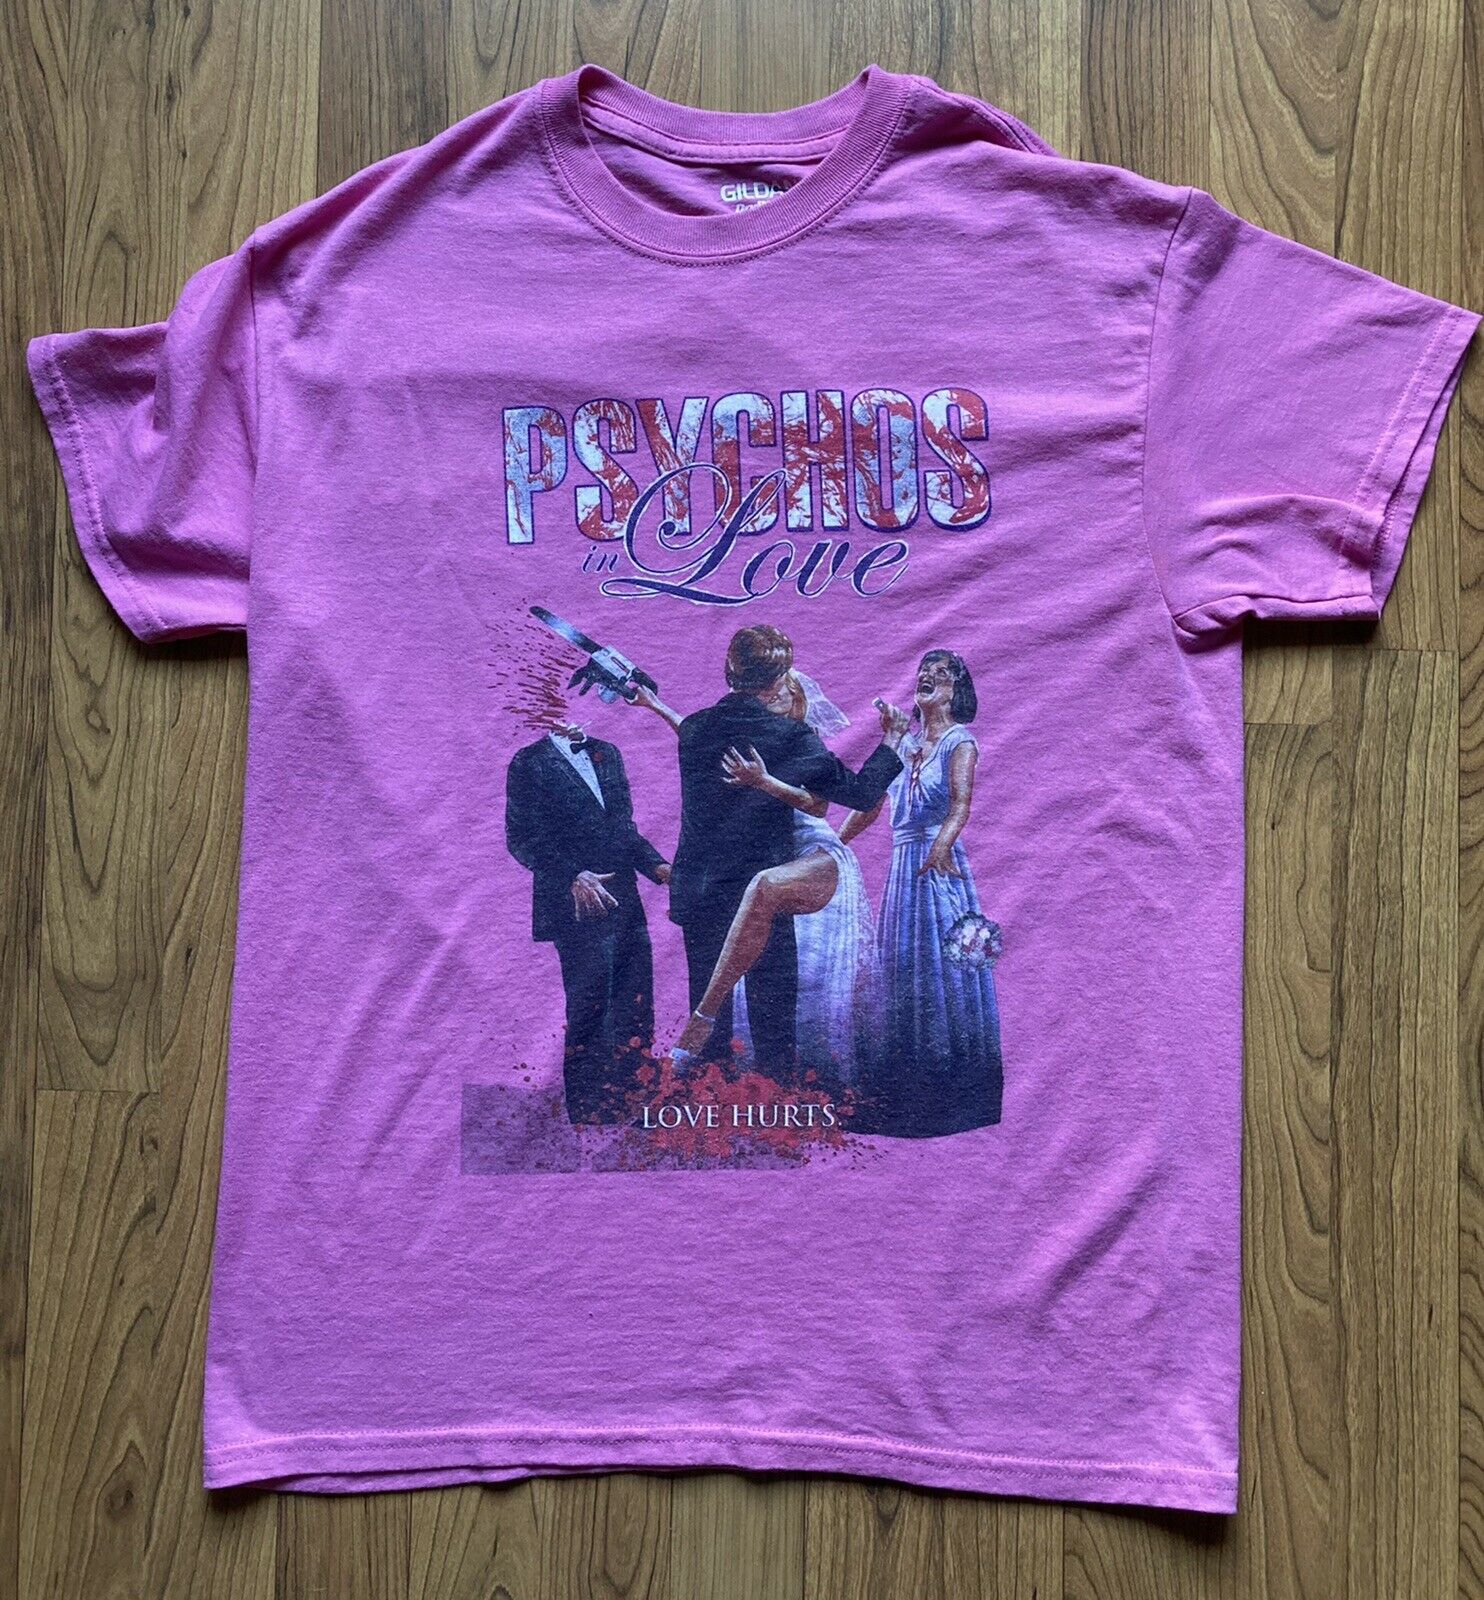 Psychos In Love Medium T-shirt Horror Comedy Disconnected Wizard Video Not Vhs